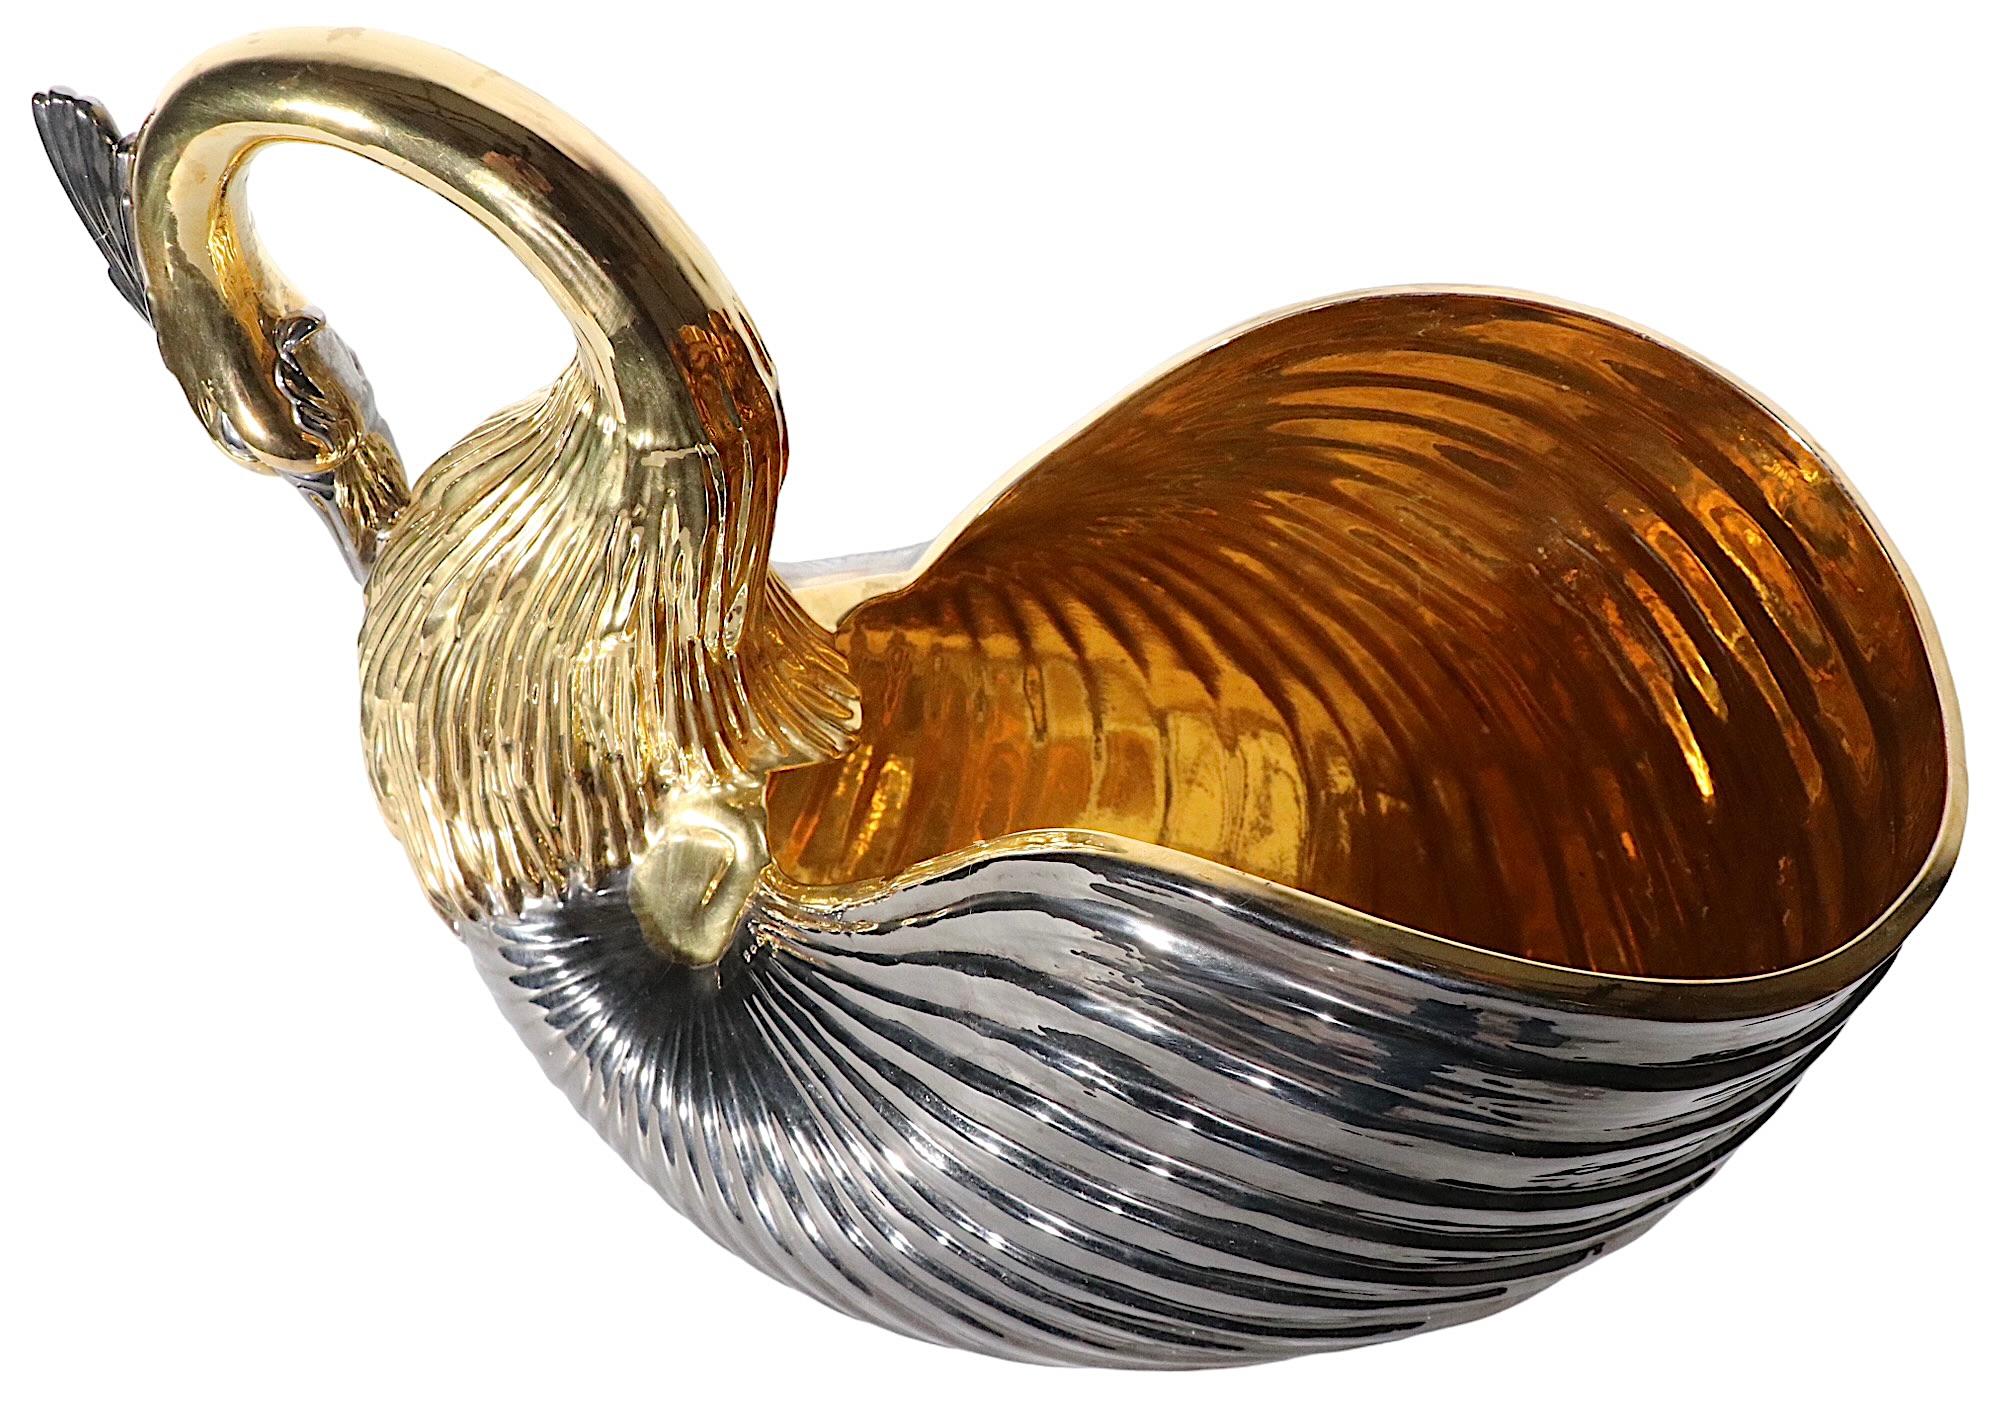 Stunning Italian Porcelain Ceramic Swan in Gold Luster and Dark Silver, c 1970s For Sale 1